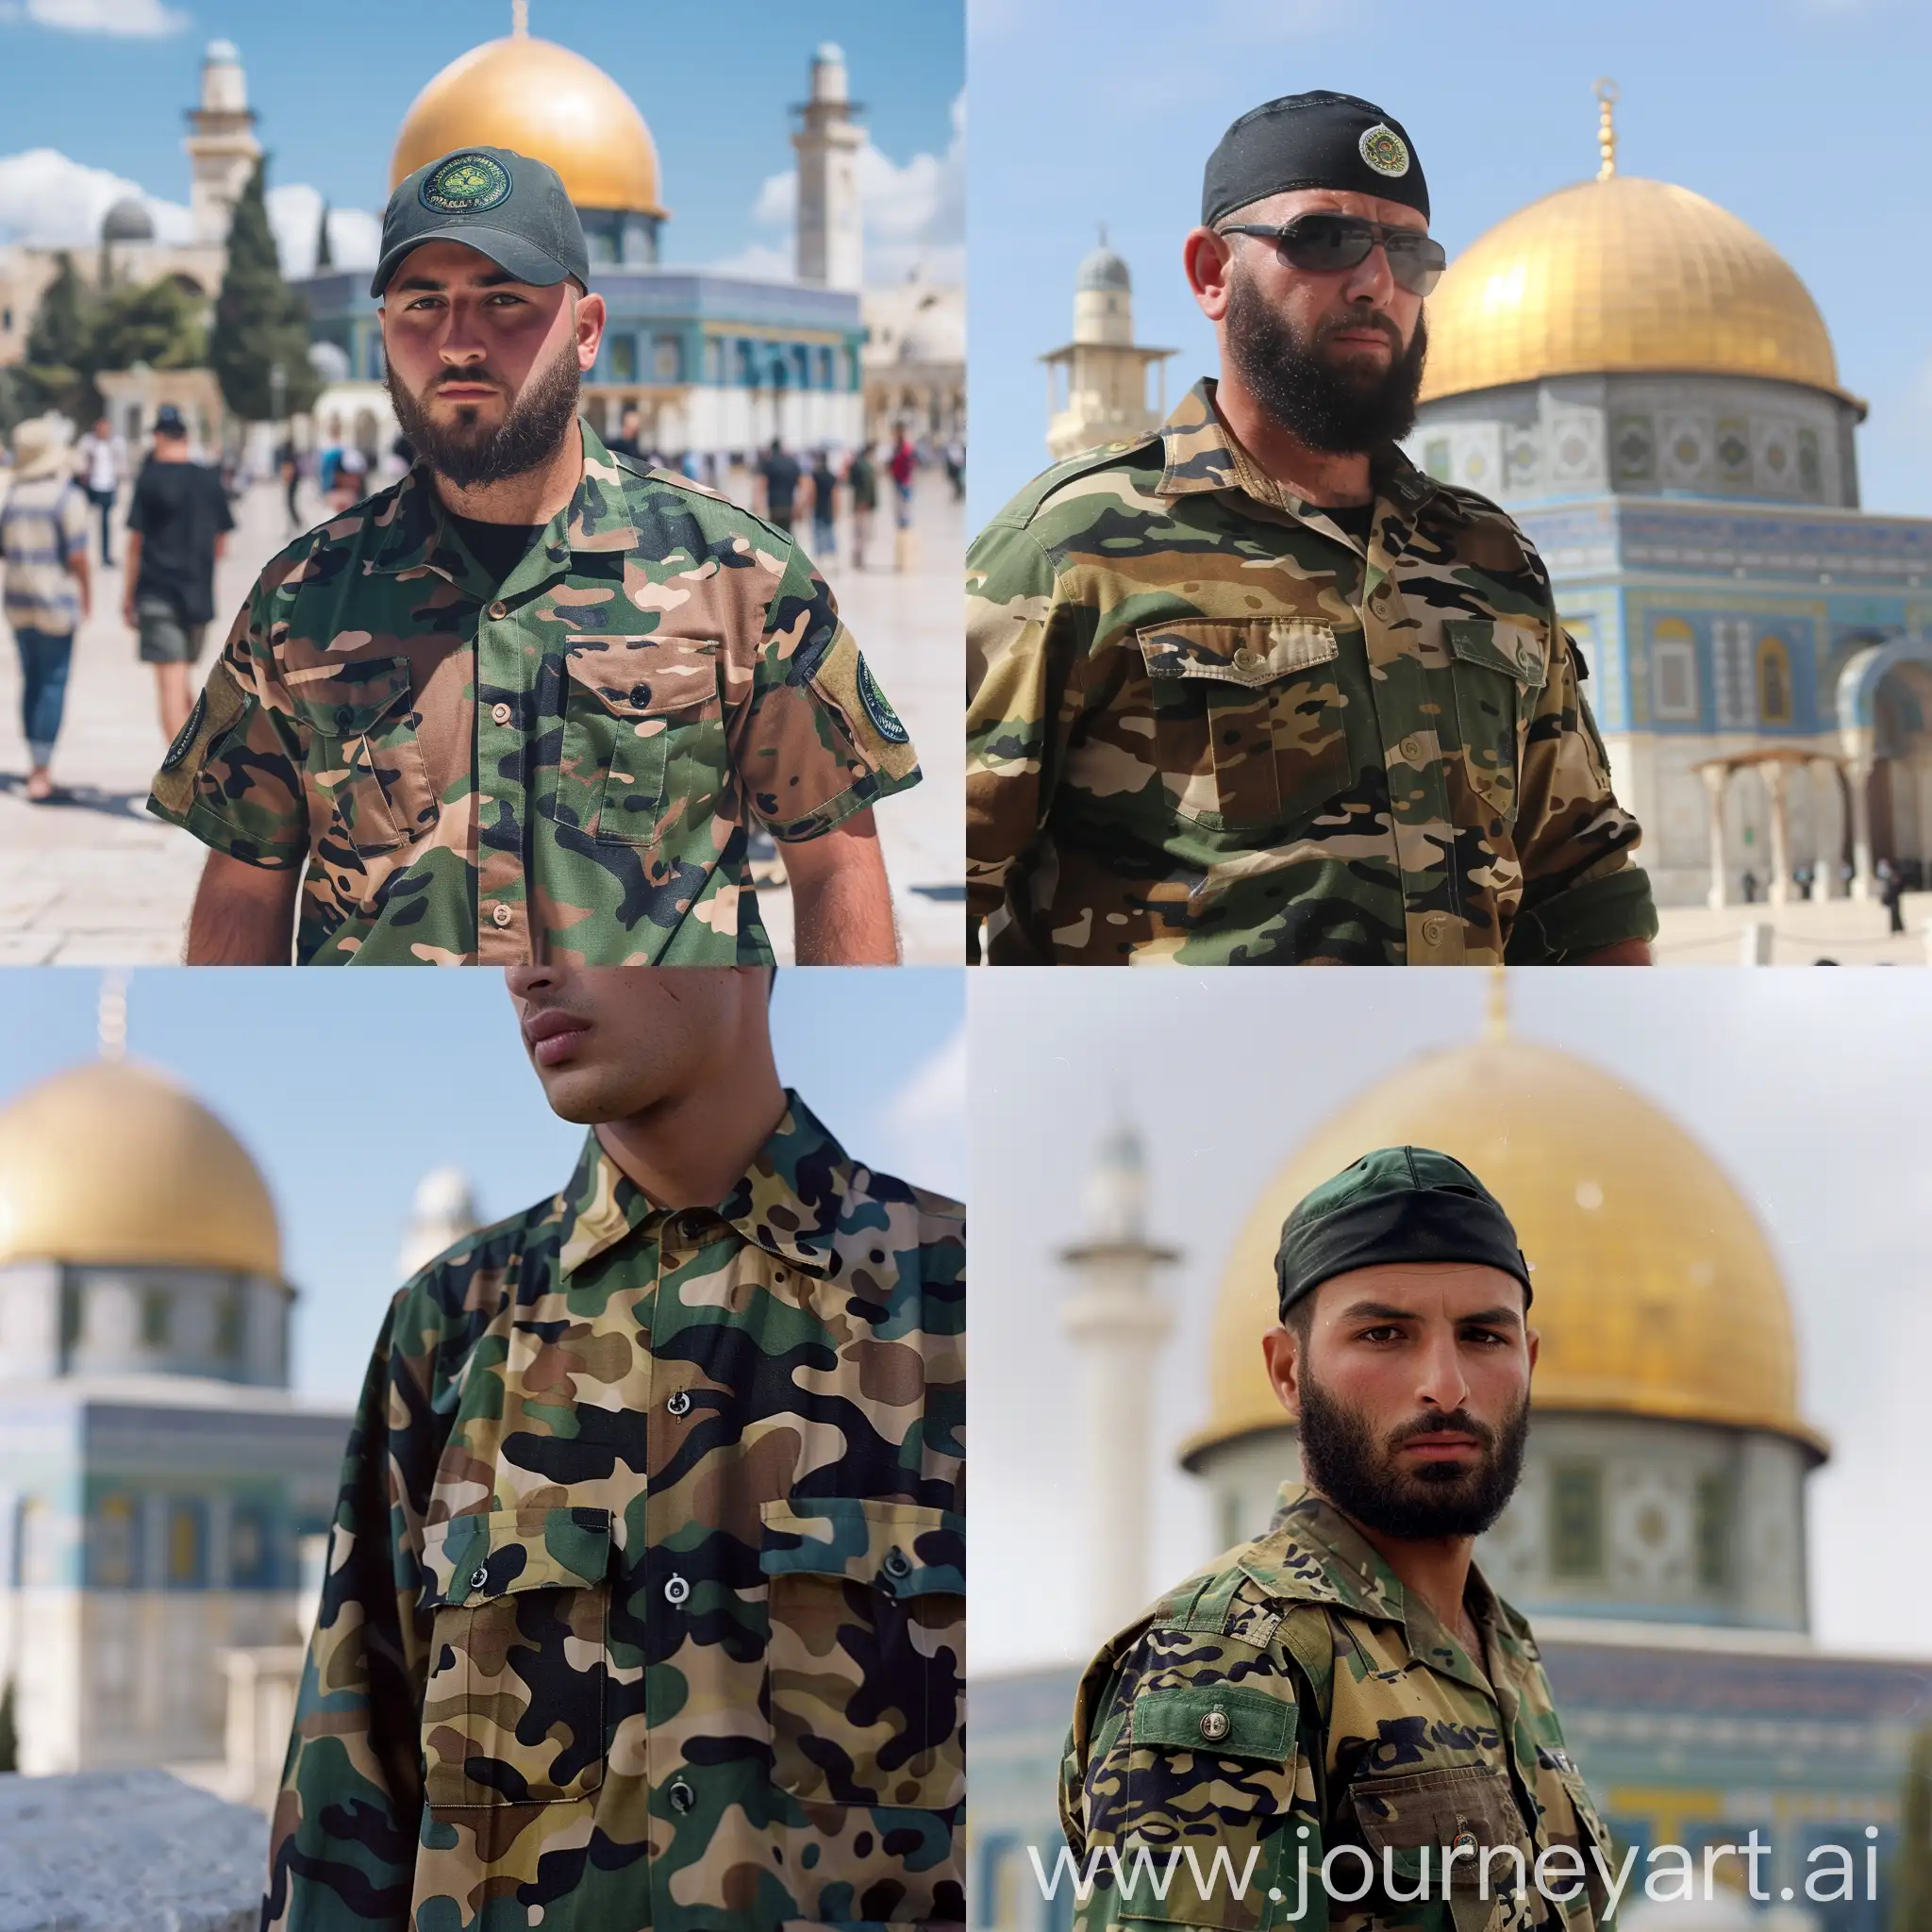 Hezbollah-Soldier-in-Military-Shirt-with-Dome-of-the-Rock-in-Background